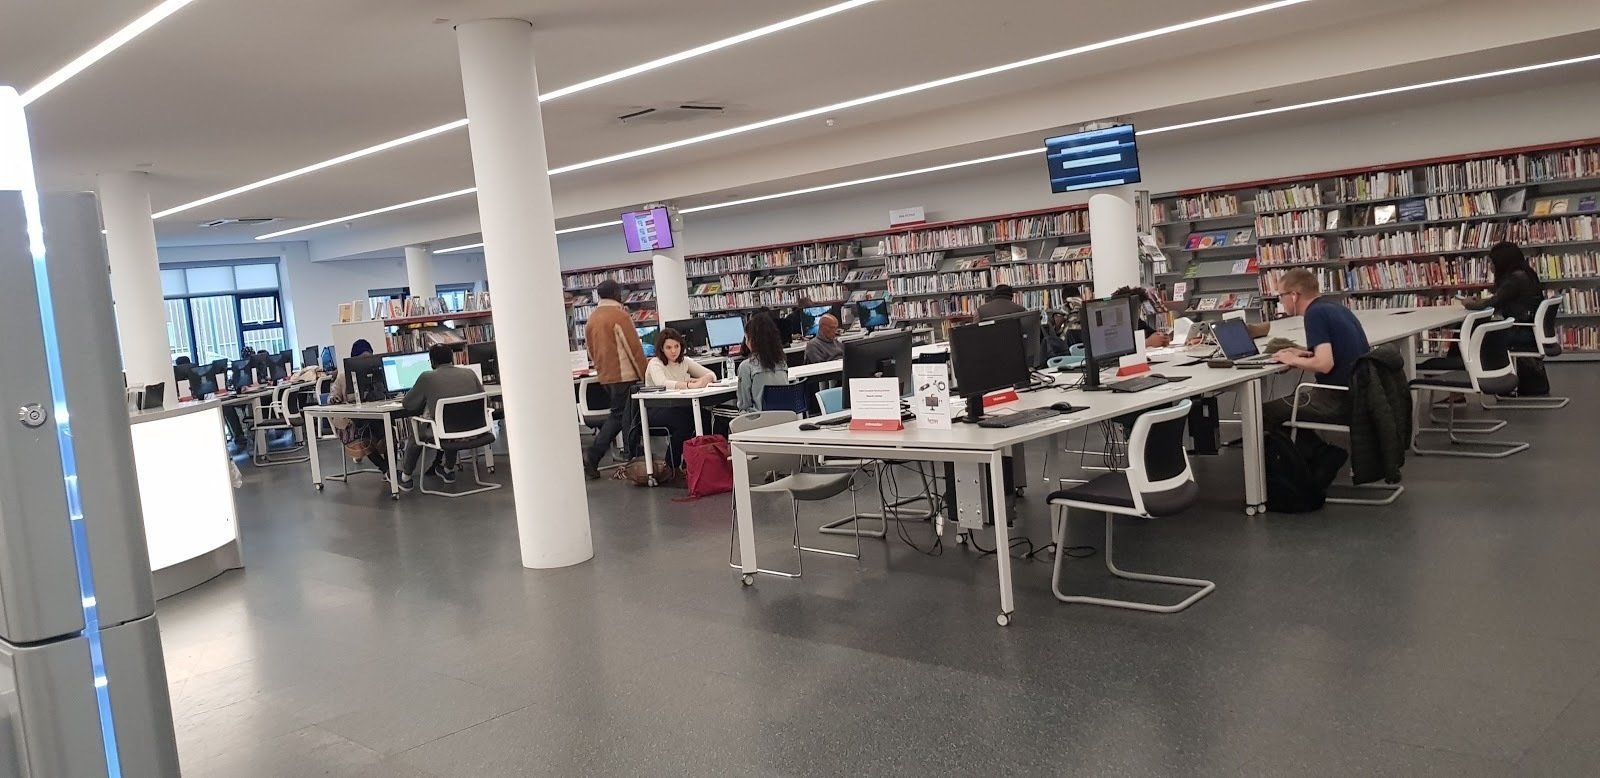 <span class="translation_missing" title="translation missing: en.meta.location_title, location_name: Marcus Garvey Library, city: London">Location Title</span>